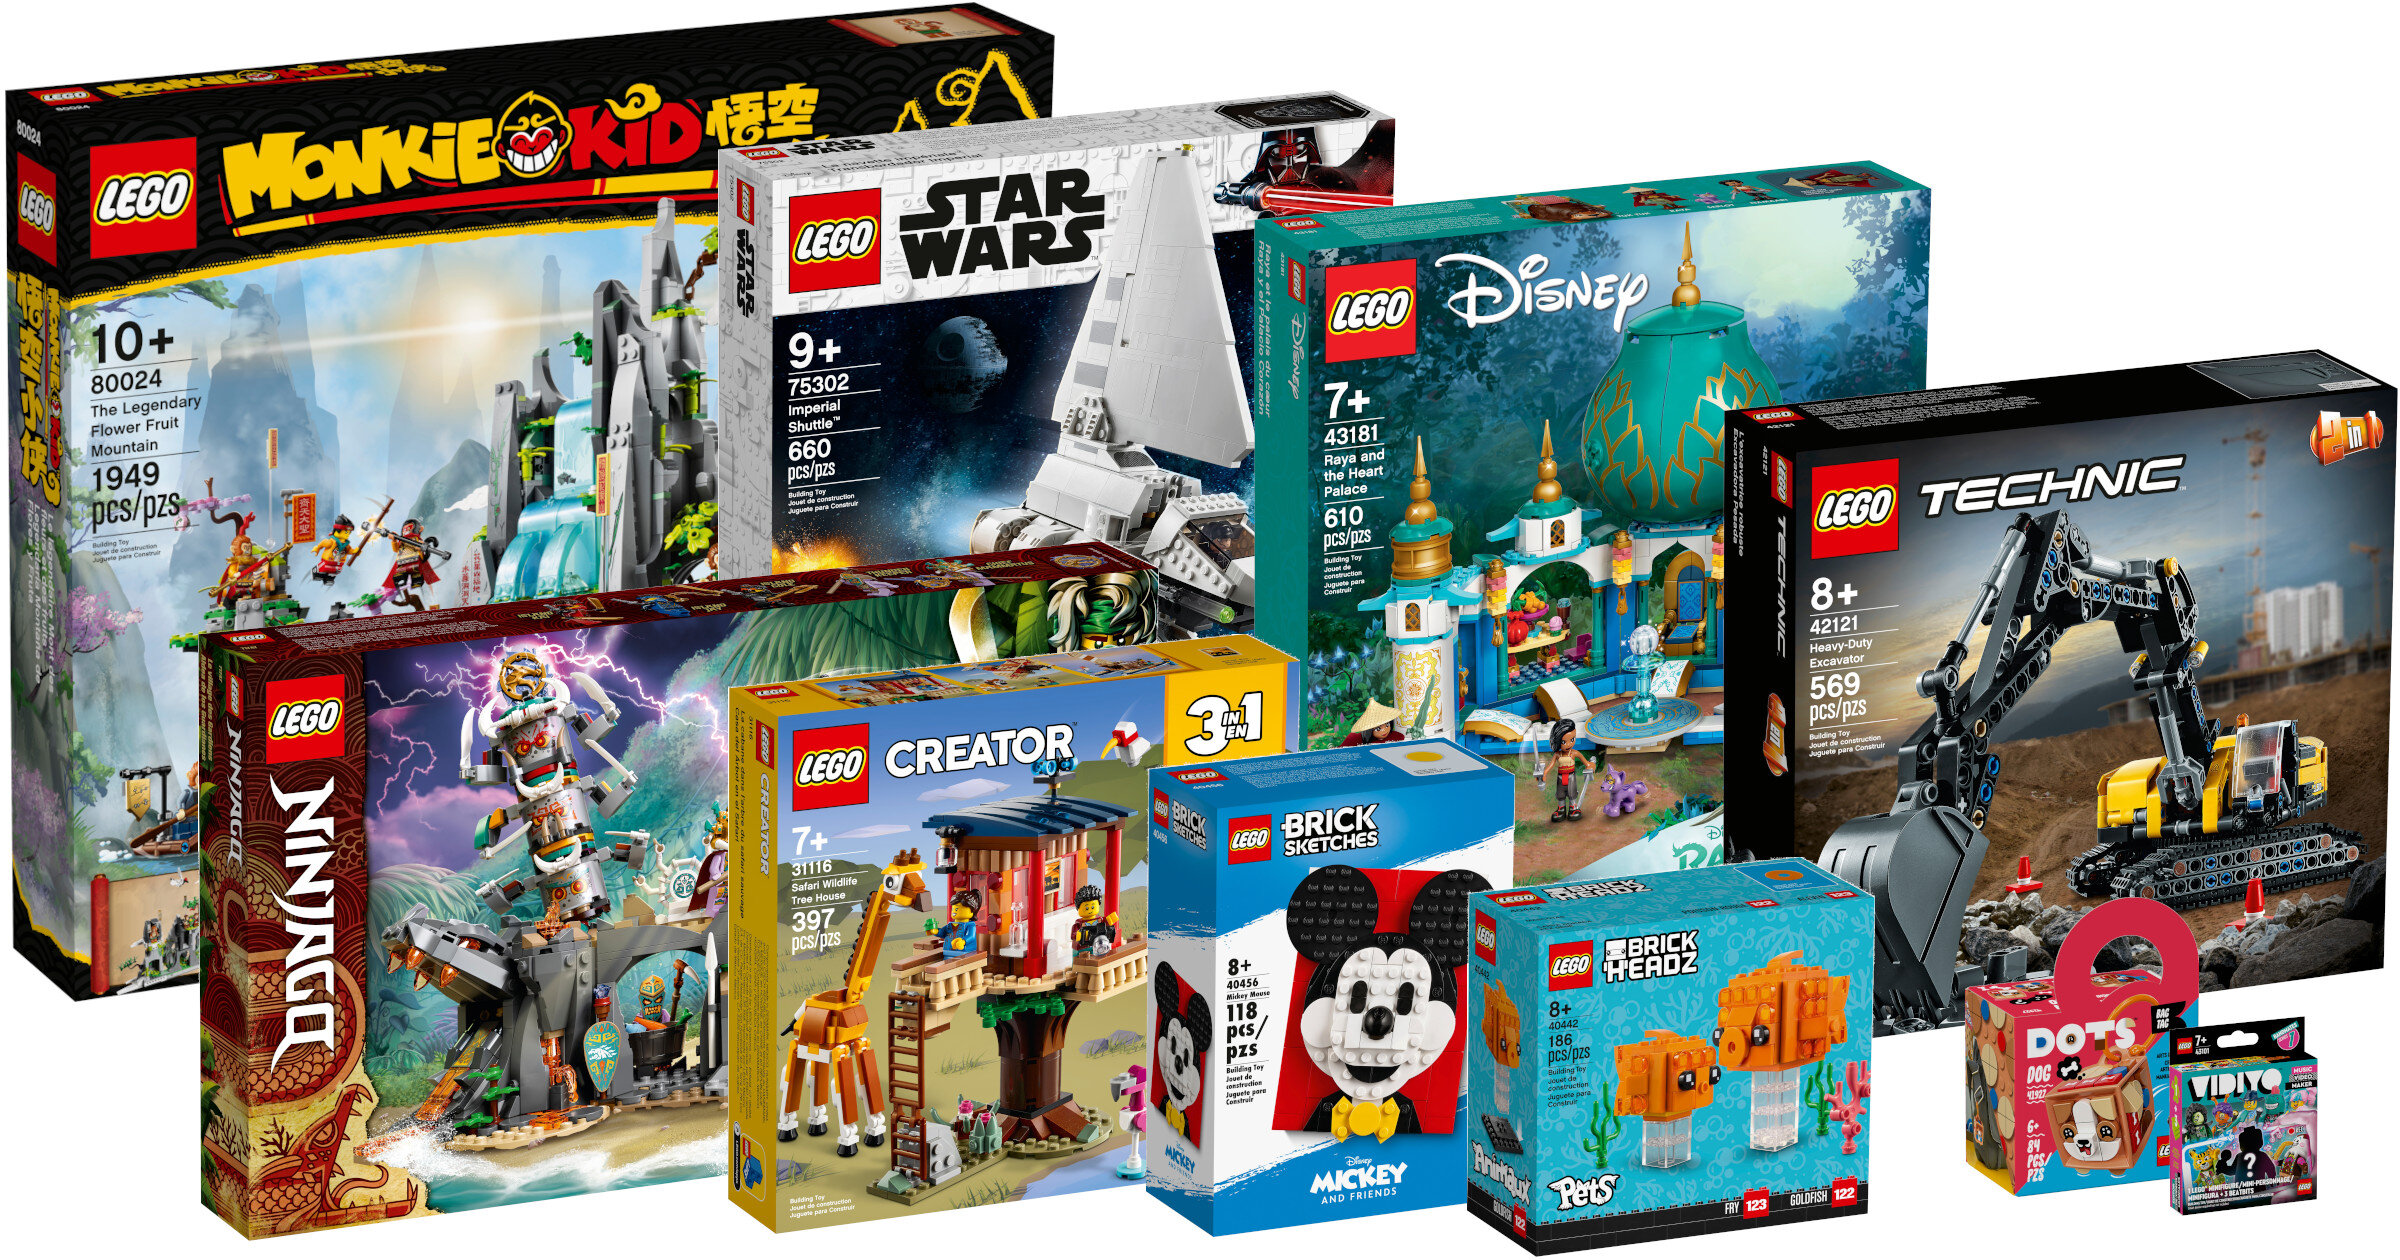 New LEGO Sets for March 2021 Have for Everyone - BrickNerd - All things LEGO and the LEGO fan community